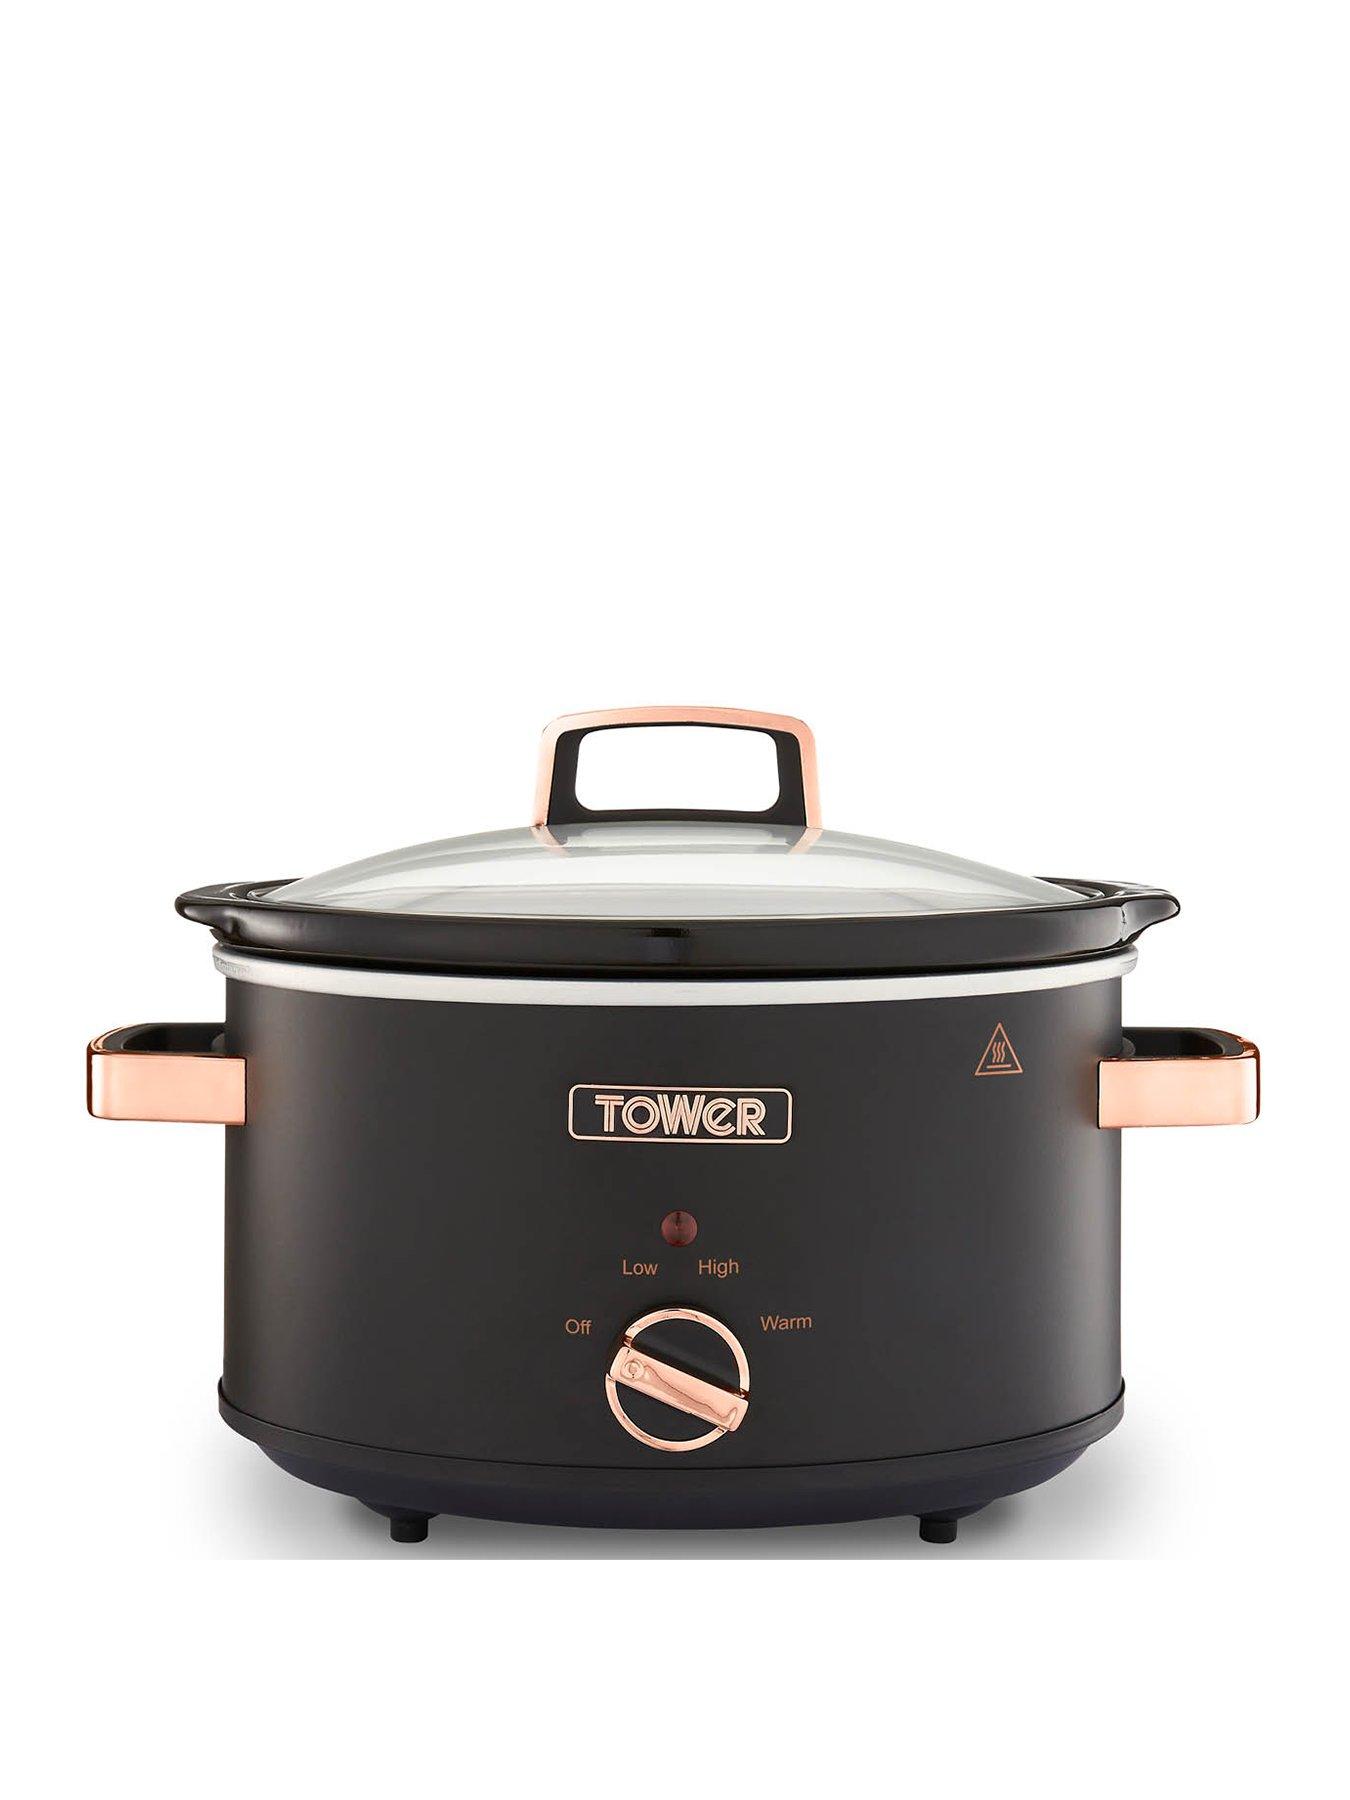 Tower, Slow cookers, Cooking appliances, Electricals